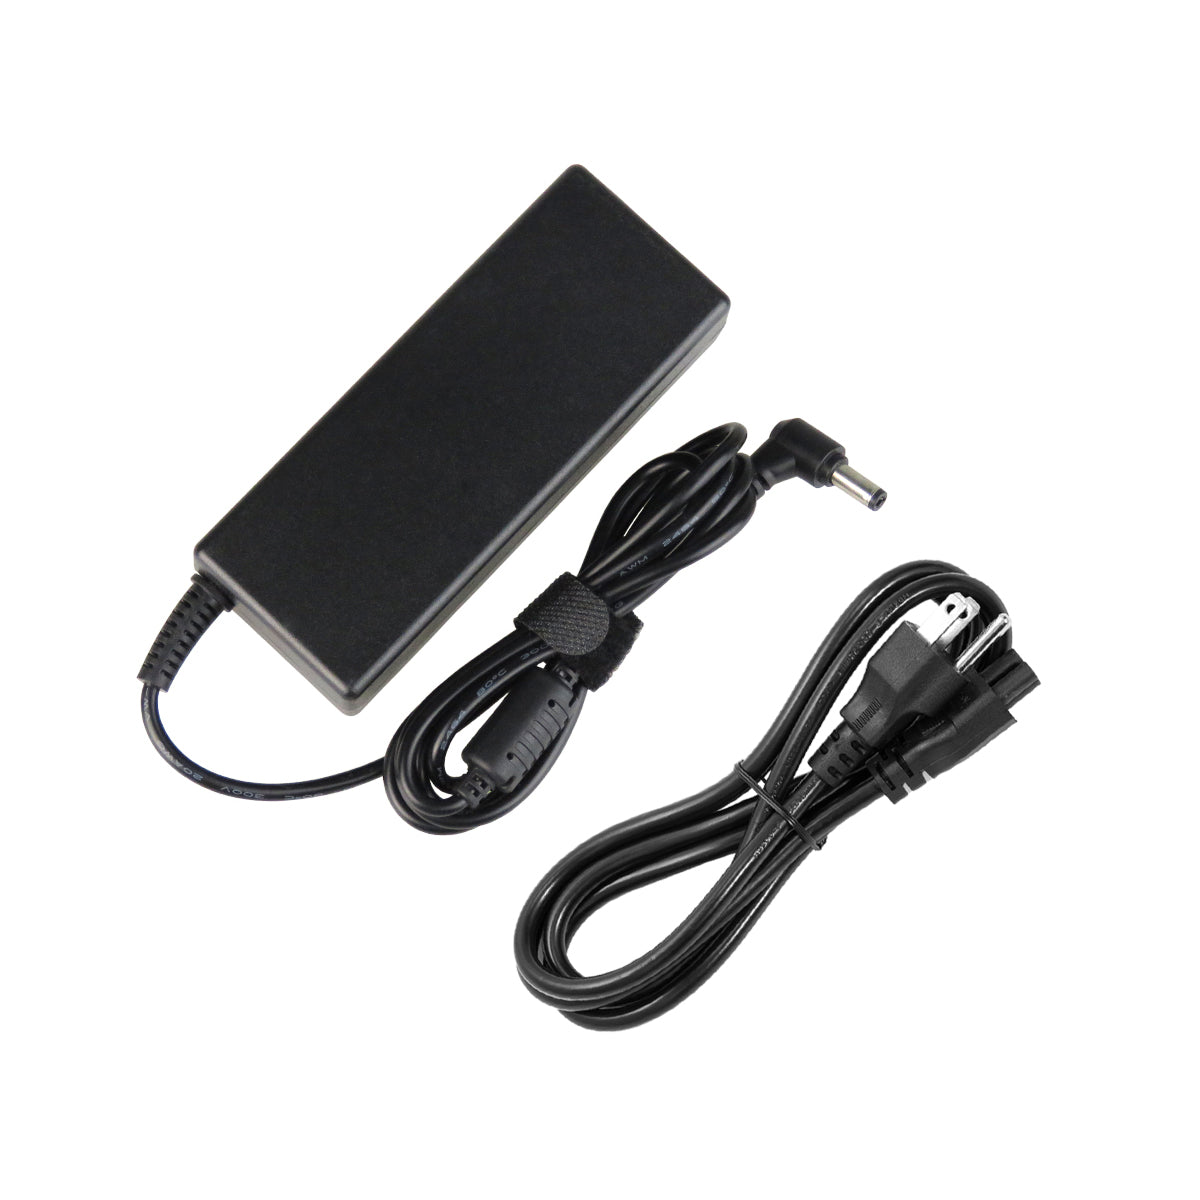 AC Adapter Charger for ASUS F52A Notebook.